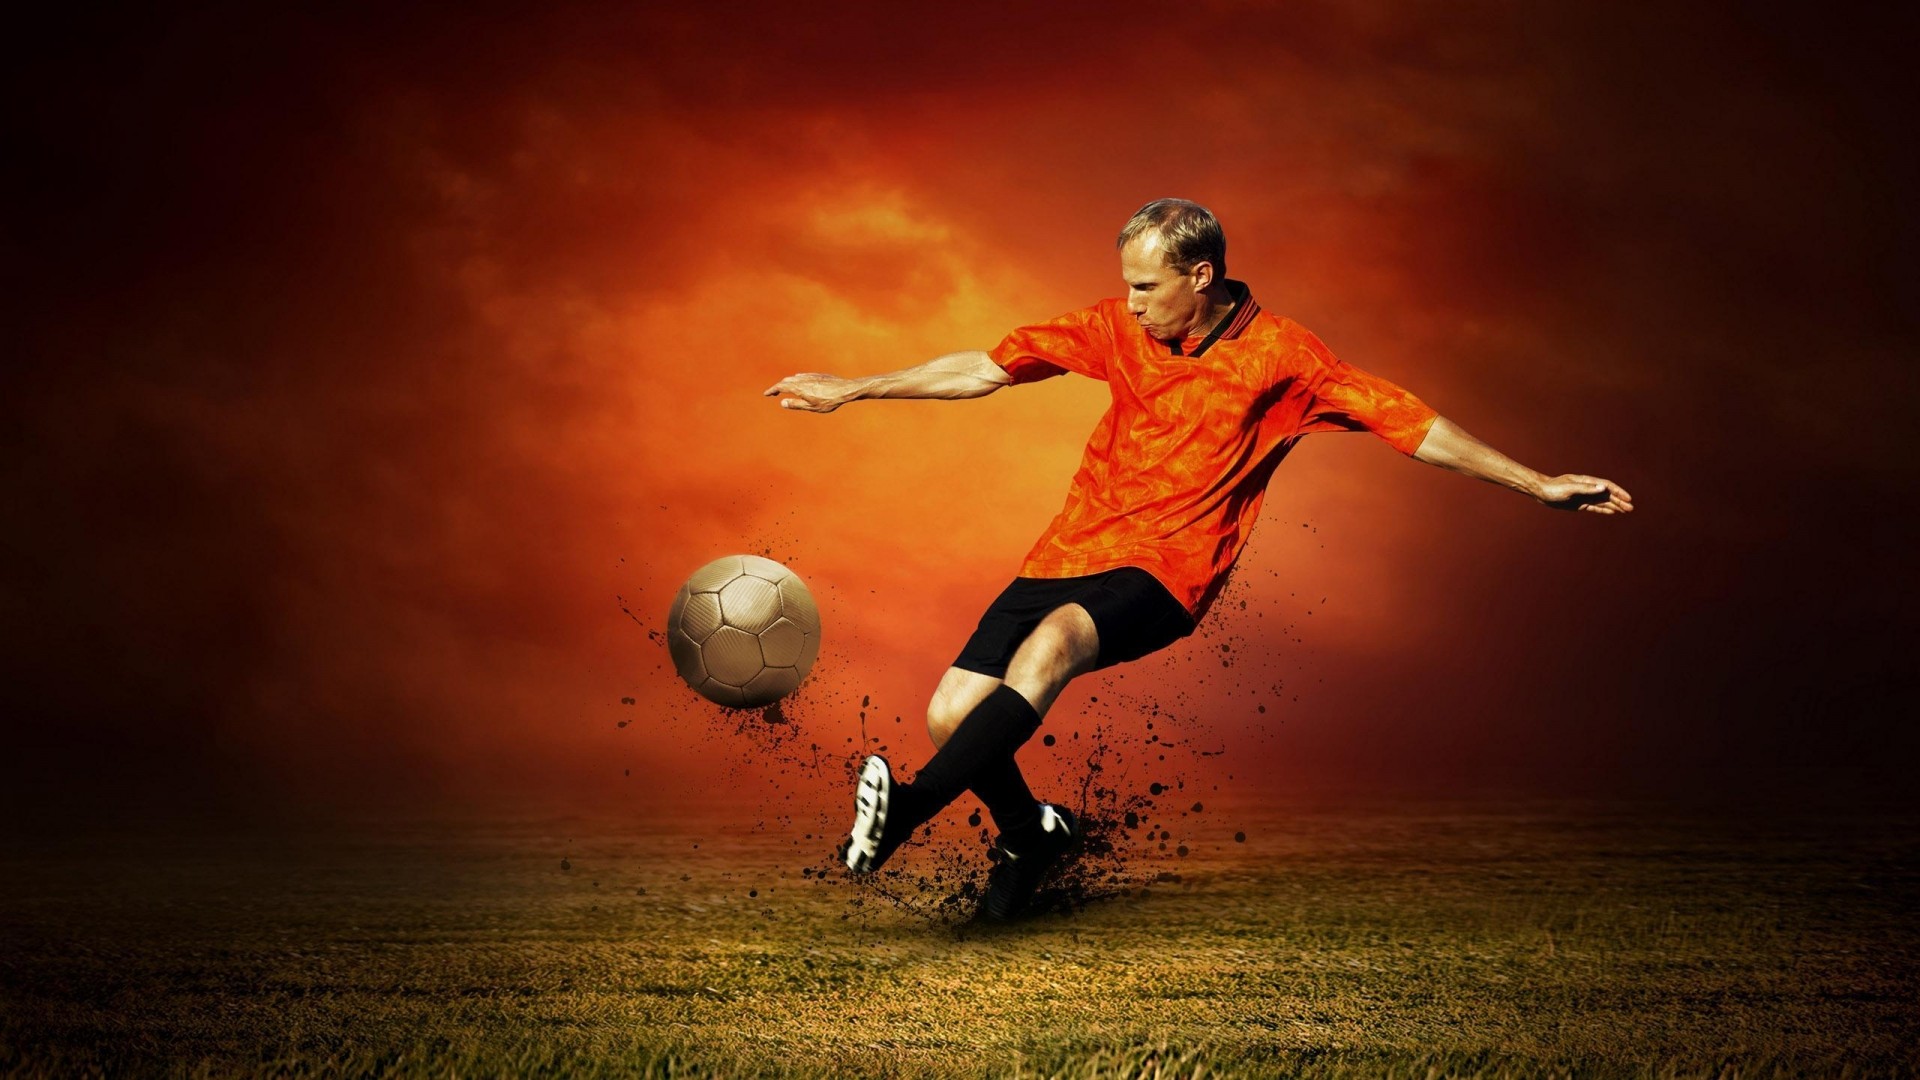 sports images free download